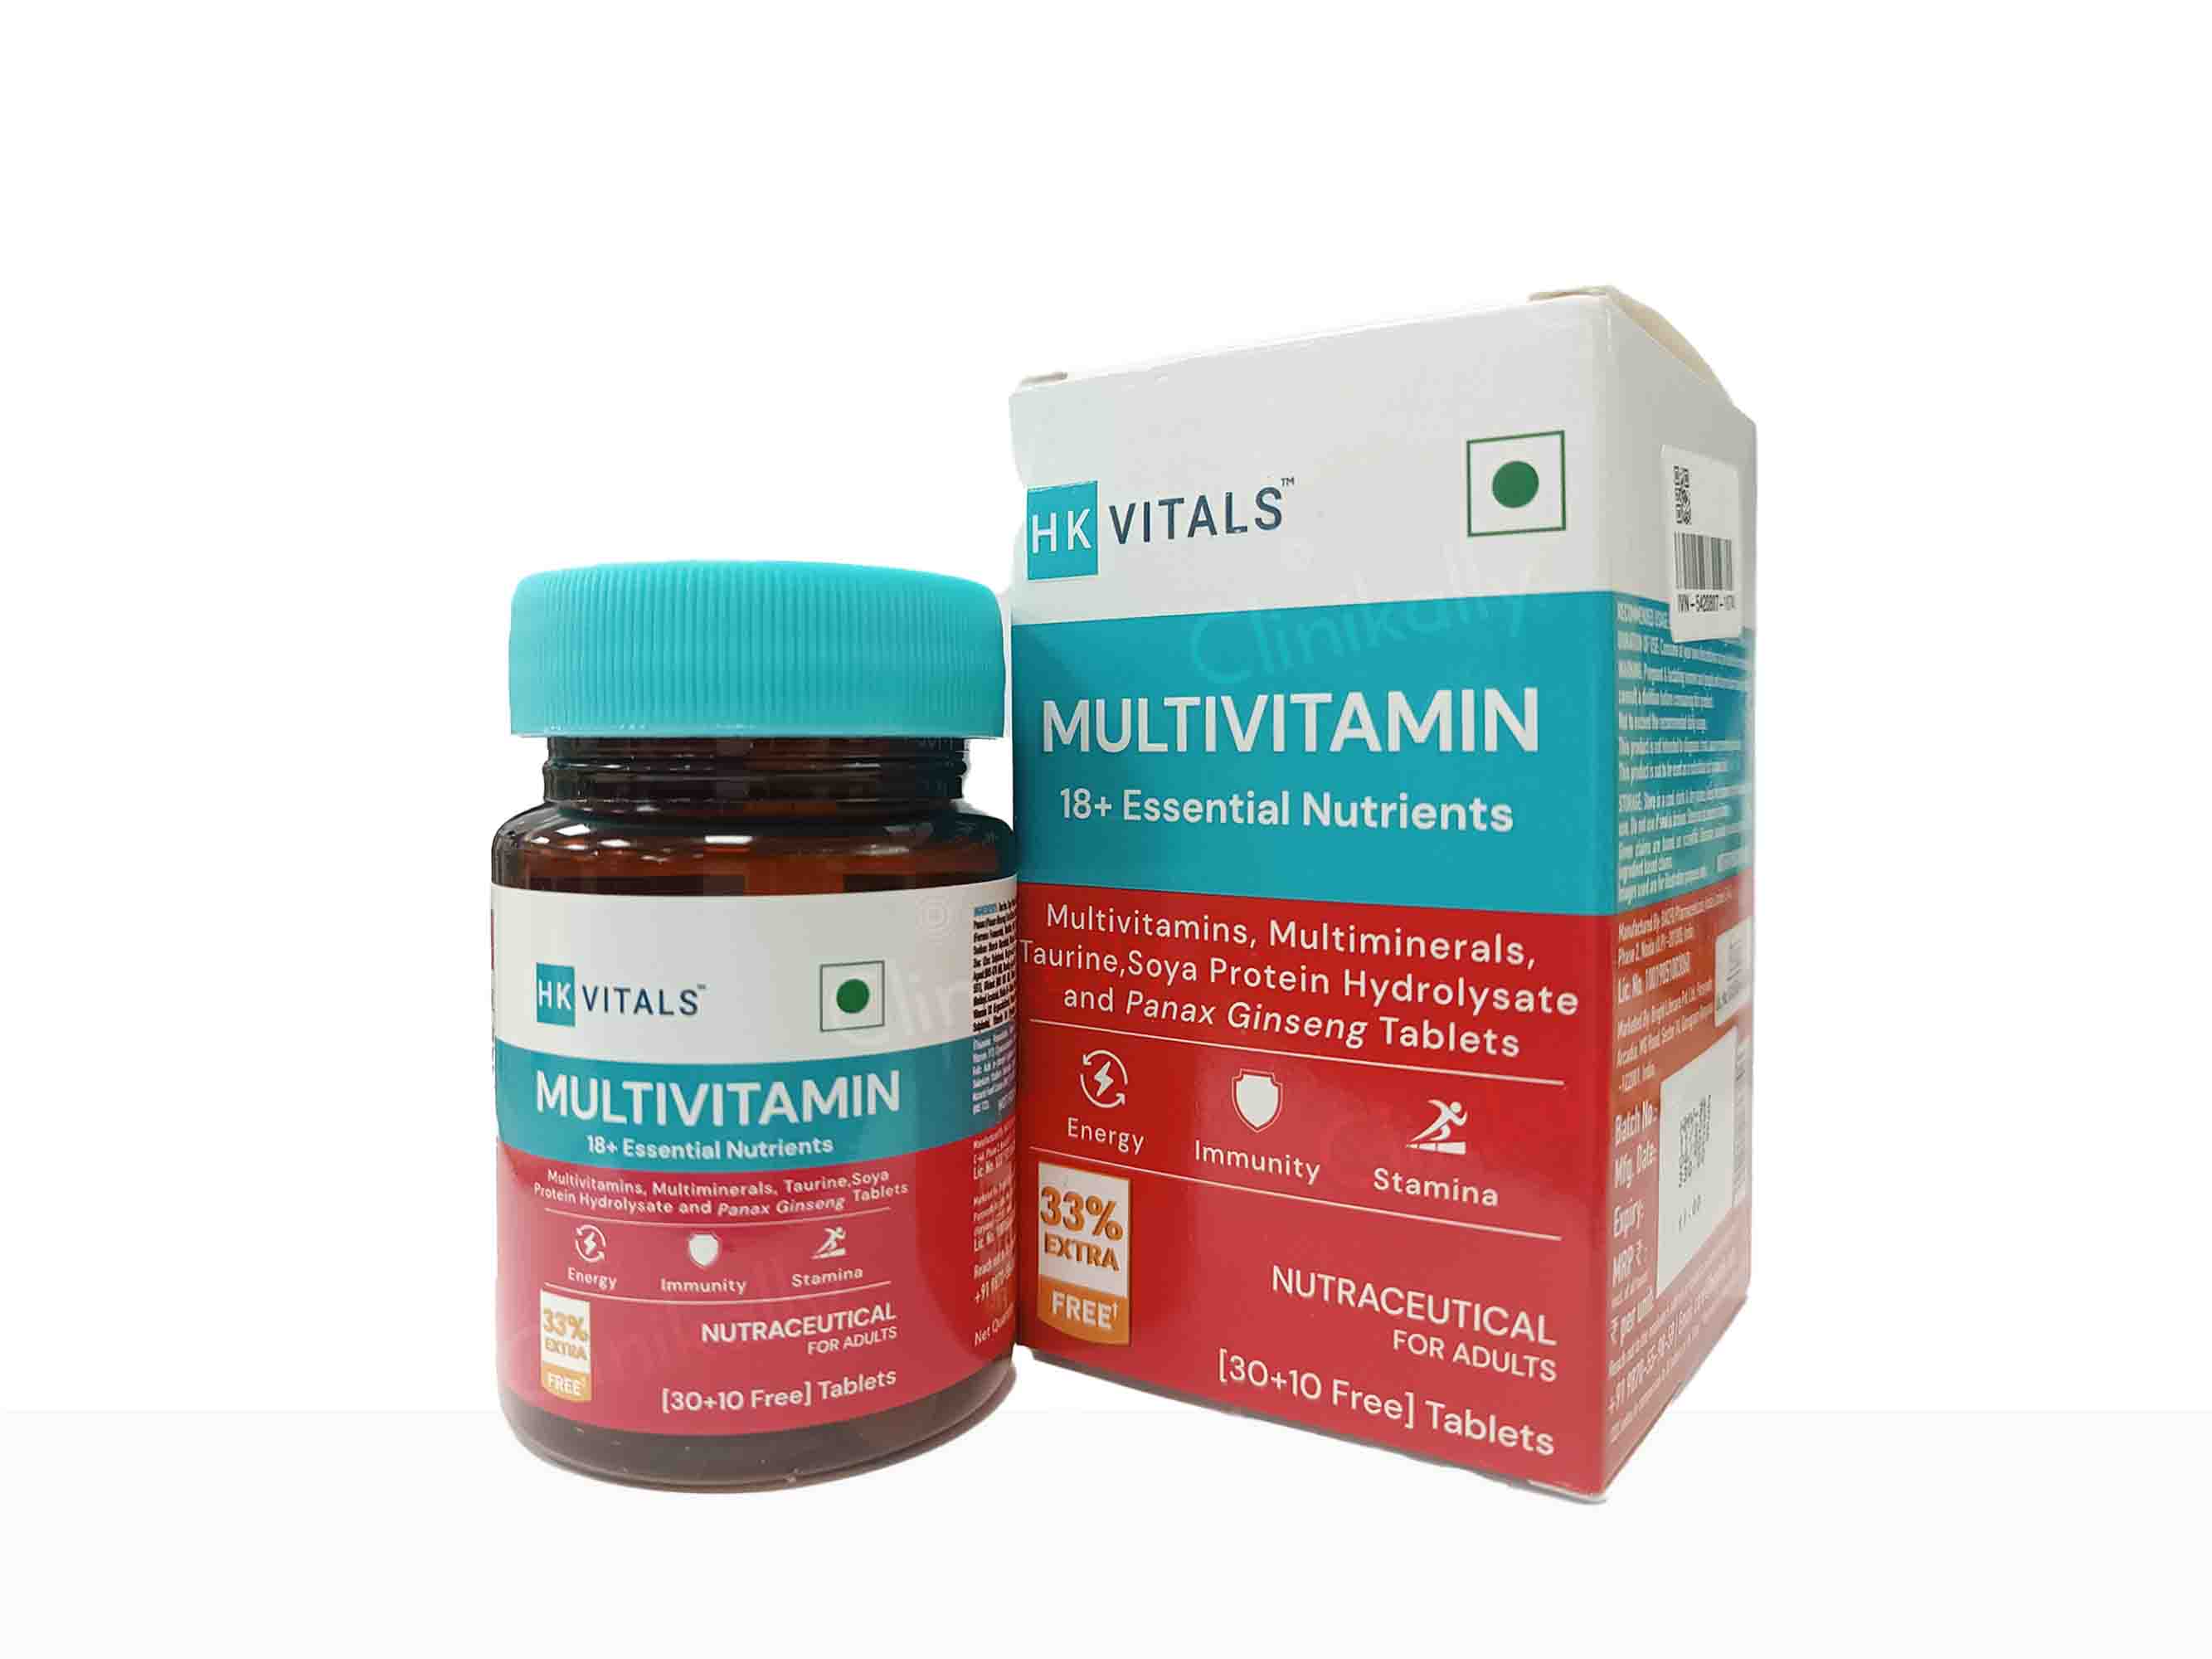 HK Vitals Multivitamin with Multimineral, Taurine & Ginseng Extract Tablet